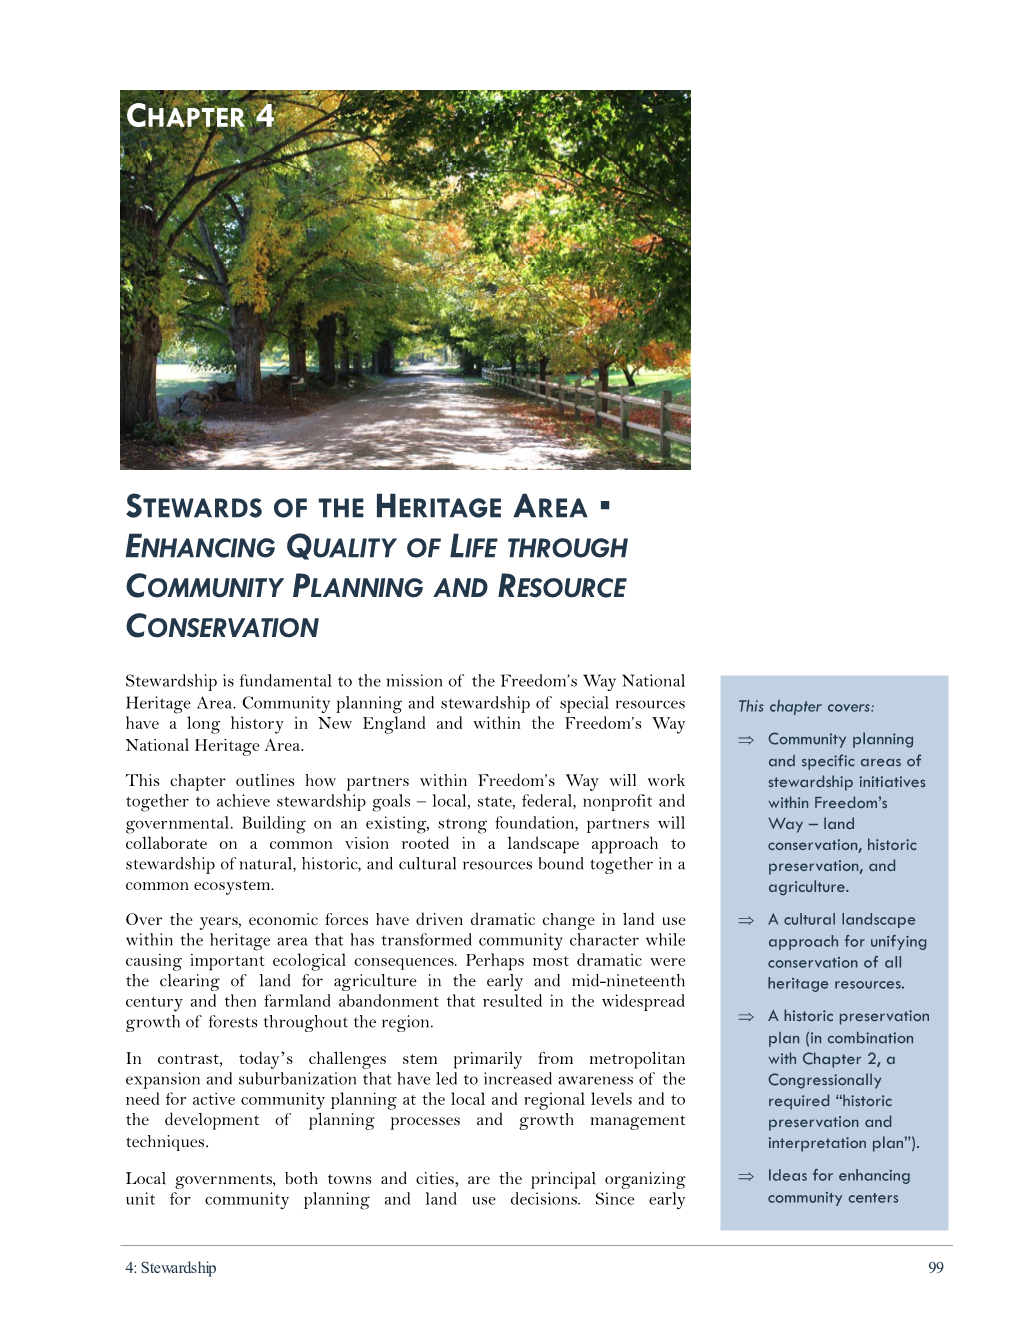 Stewards of the Heritage Area Enhancing Quality Of